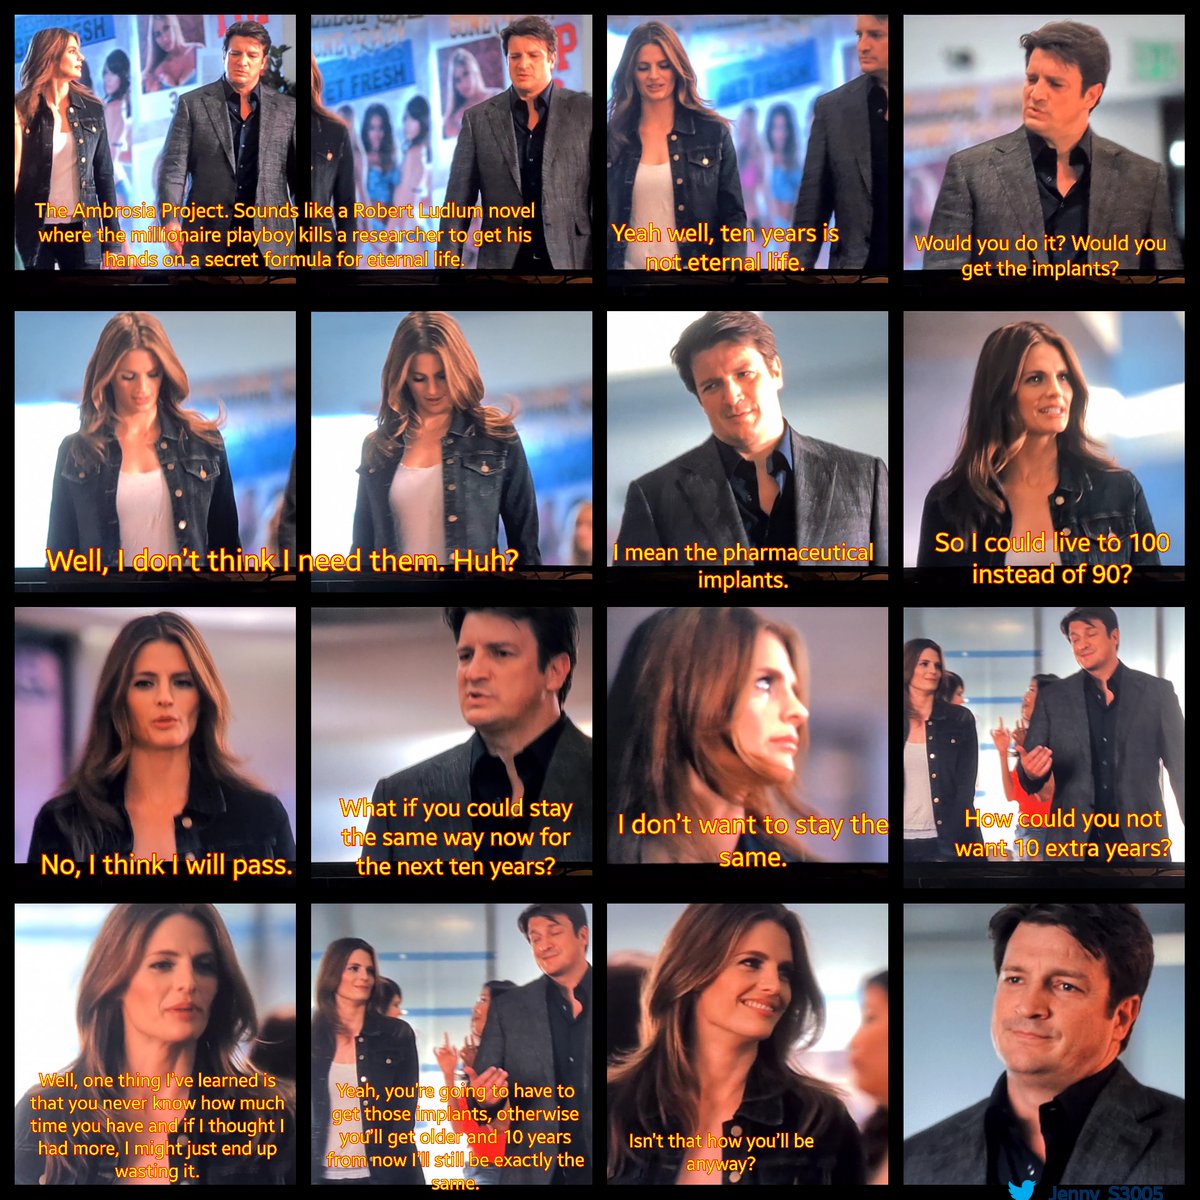 No #Castle aired on 01/17/-but a Memory 4x03-HEAD CASE

C: [..]if they reunited 100, even 1,000 years from now?
KB: Well, anything's possible.
C: You really believe that?
KB: It's what the great love stories are about, right? Beating the odds?
C: I hope they make it.
KB: Me, too. https://t.co/o1SUIluTRT